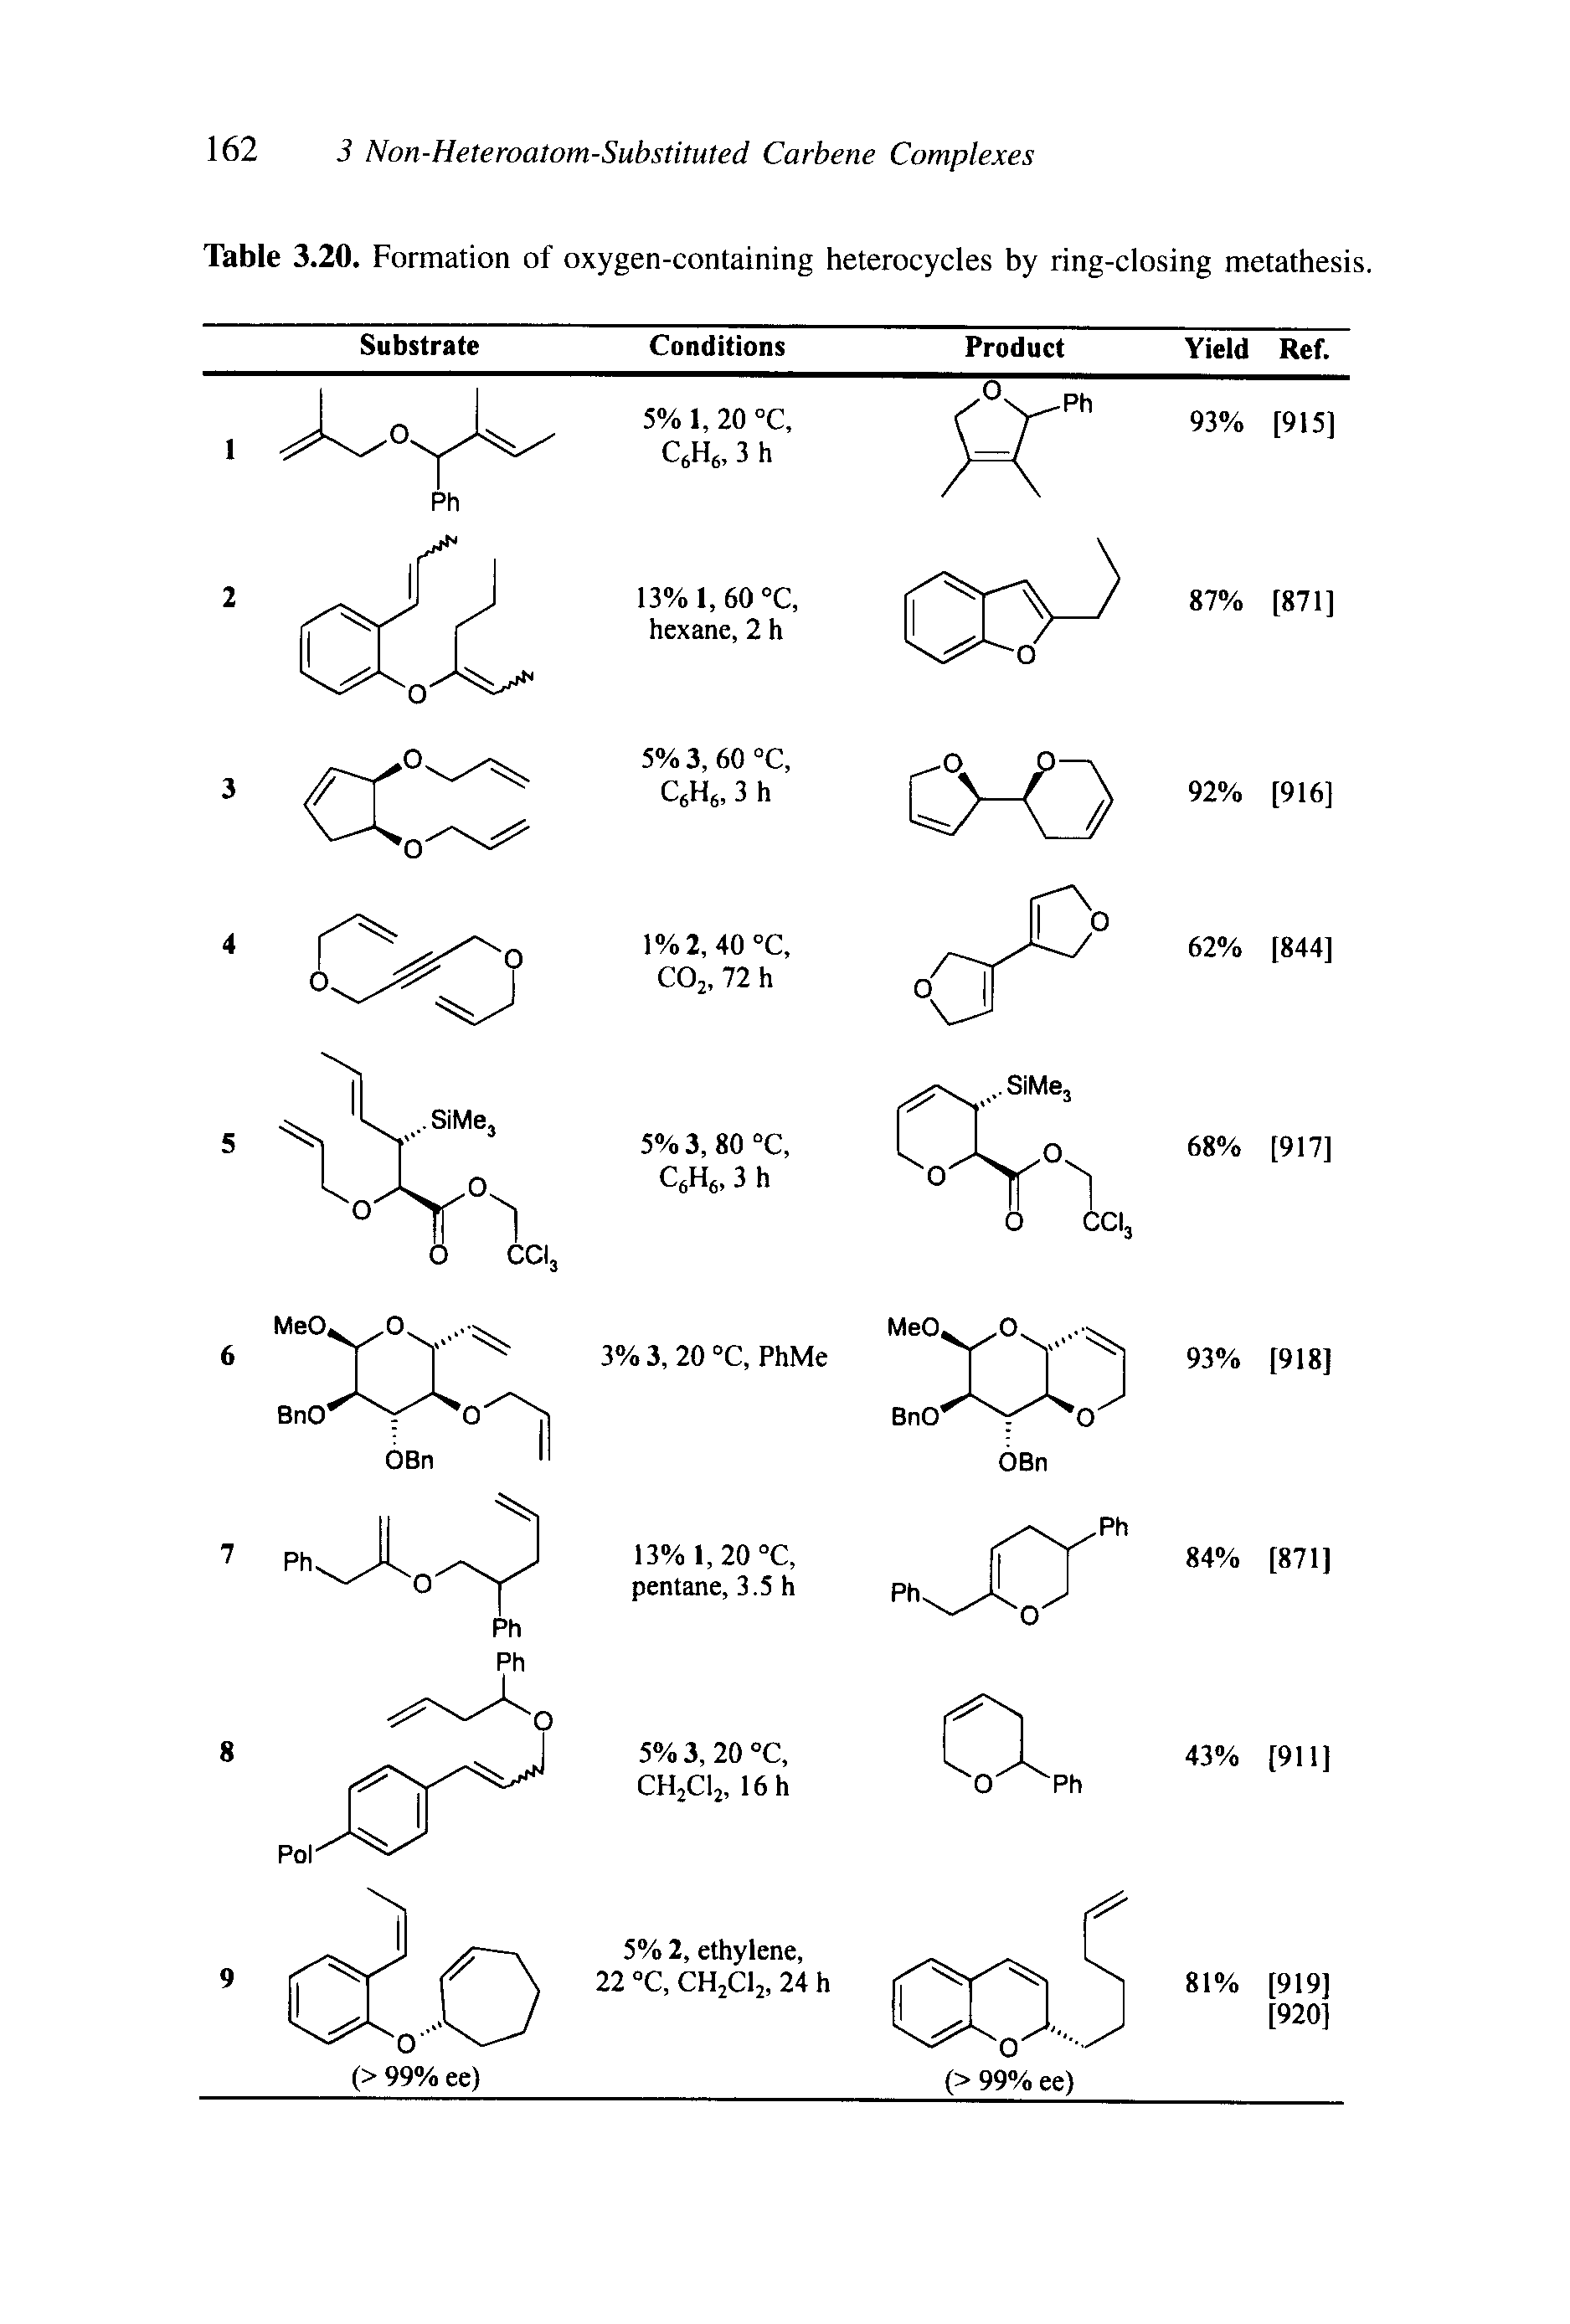 Table 3.20. Formation of oxygen-containing heterocycles by ring-closing metathesis.